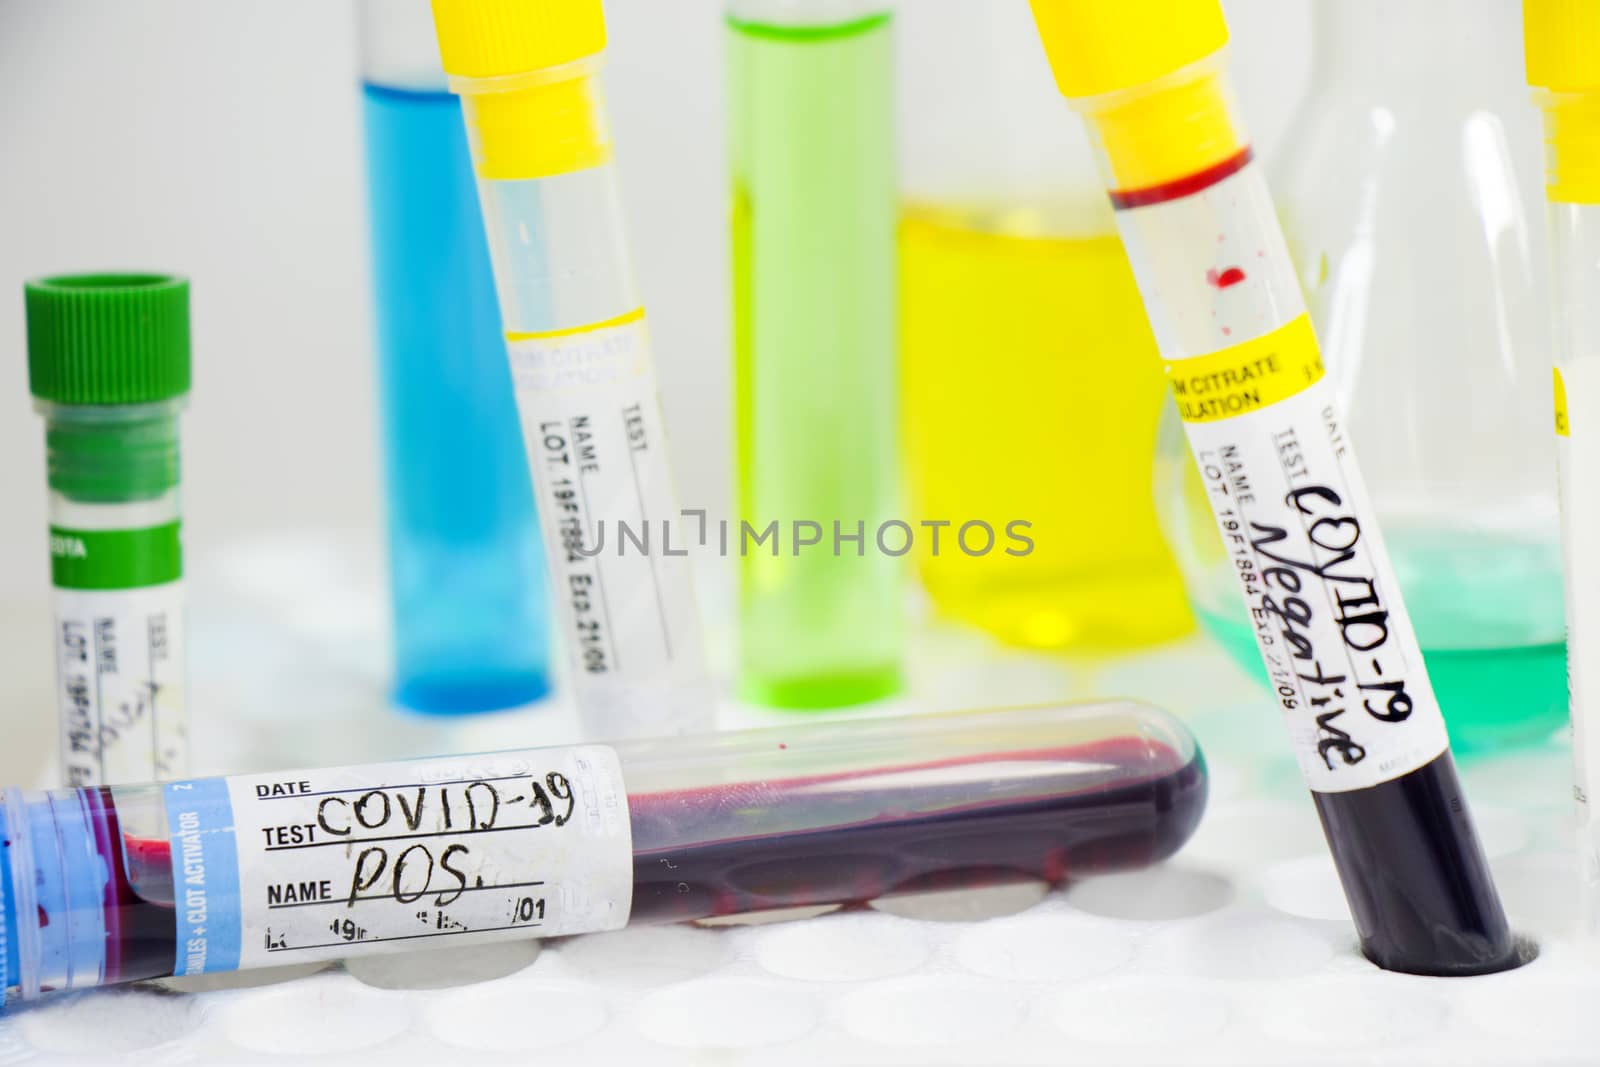 Covid - 19 and corona virus blood test sample, negative and positive tests, reagents and glassware.